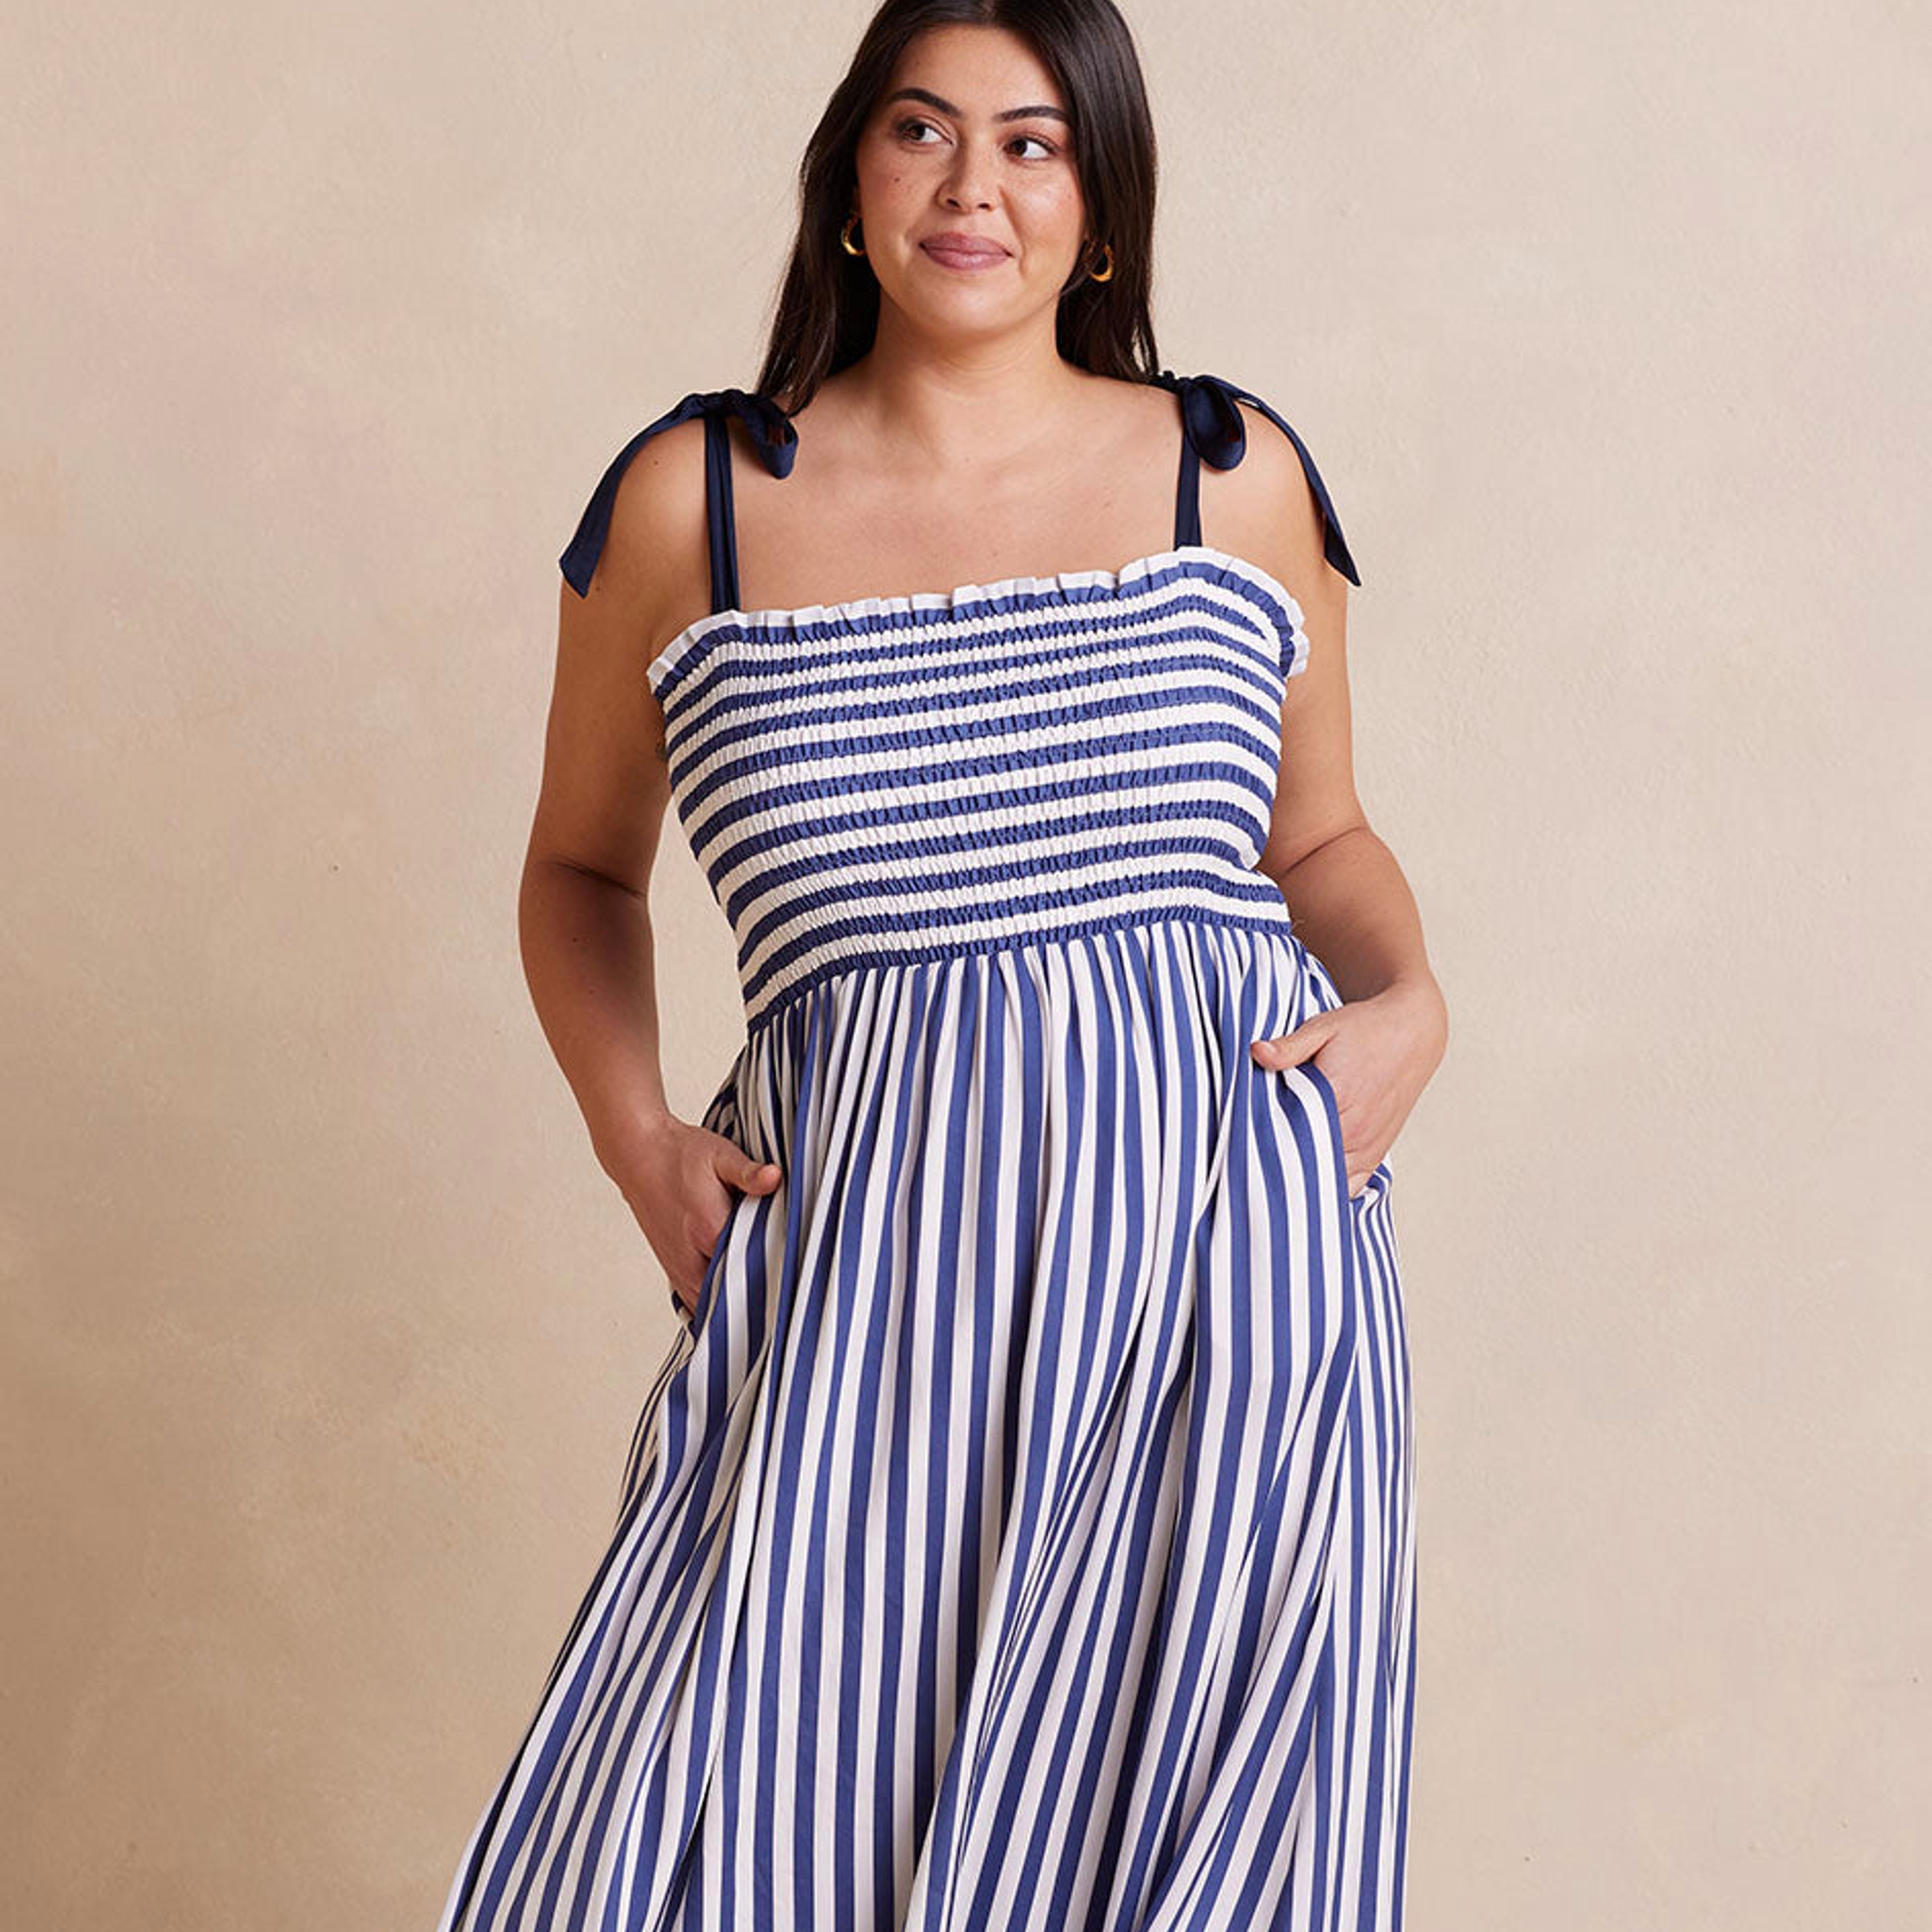 The Silky Luxe Smocked Maxi Dress - Nautical Stripe in Blue Mountain